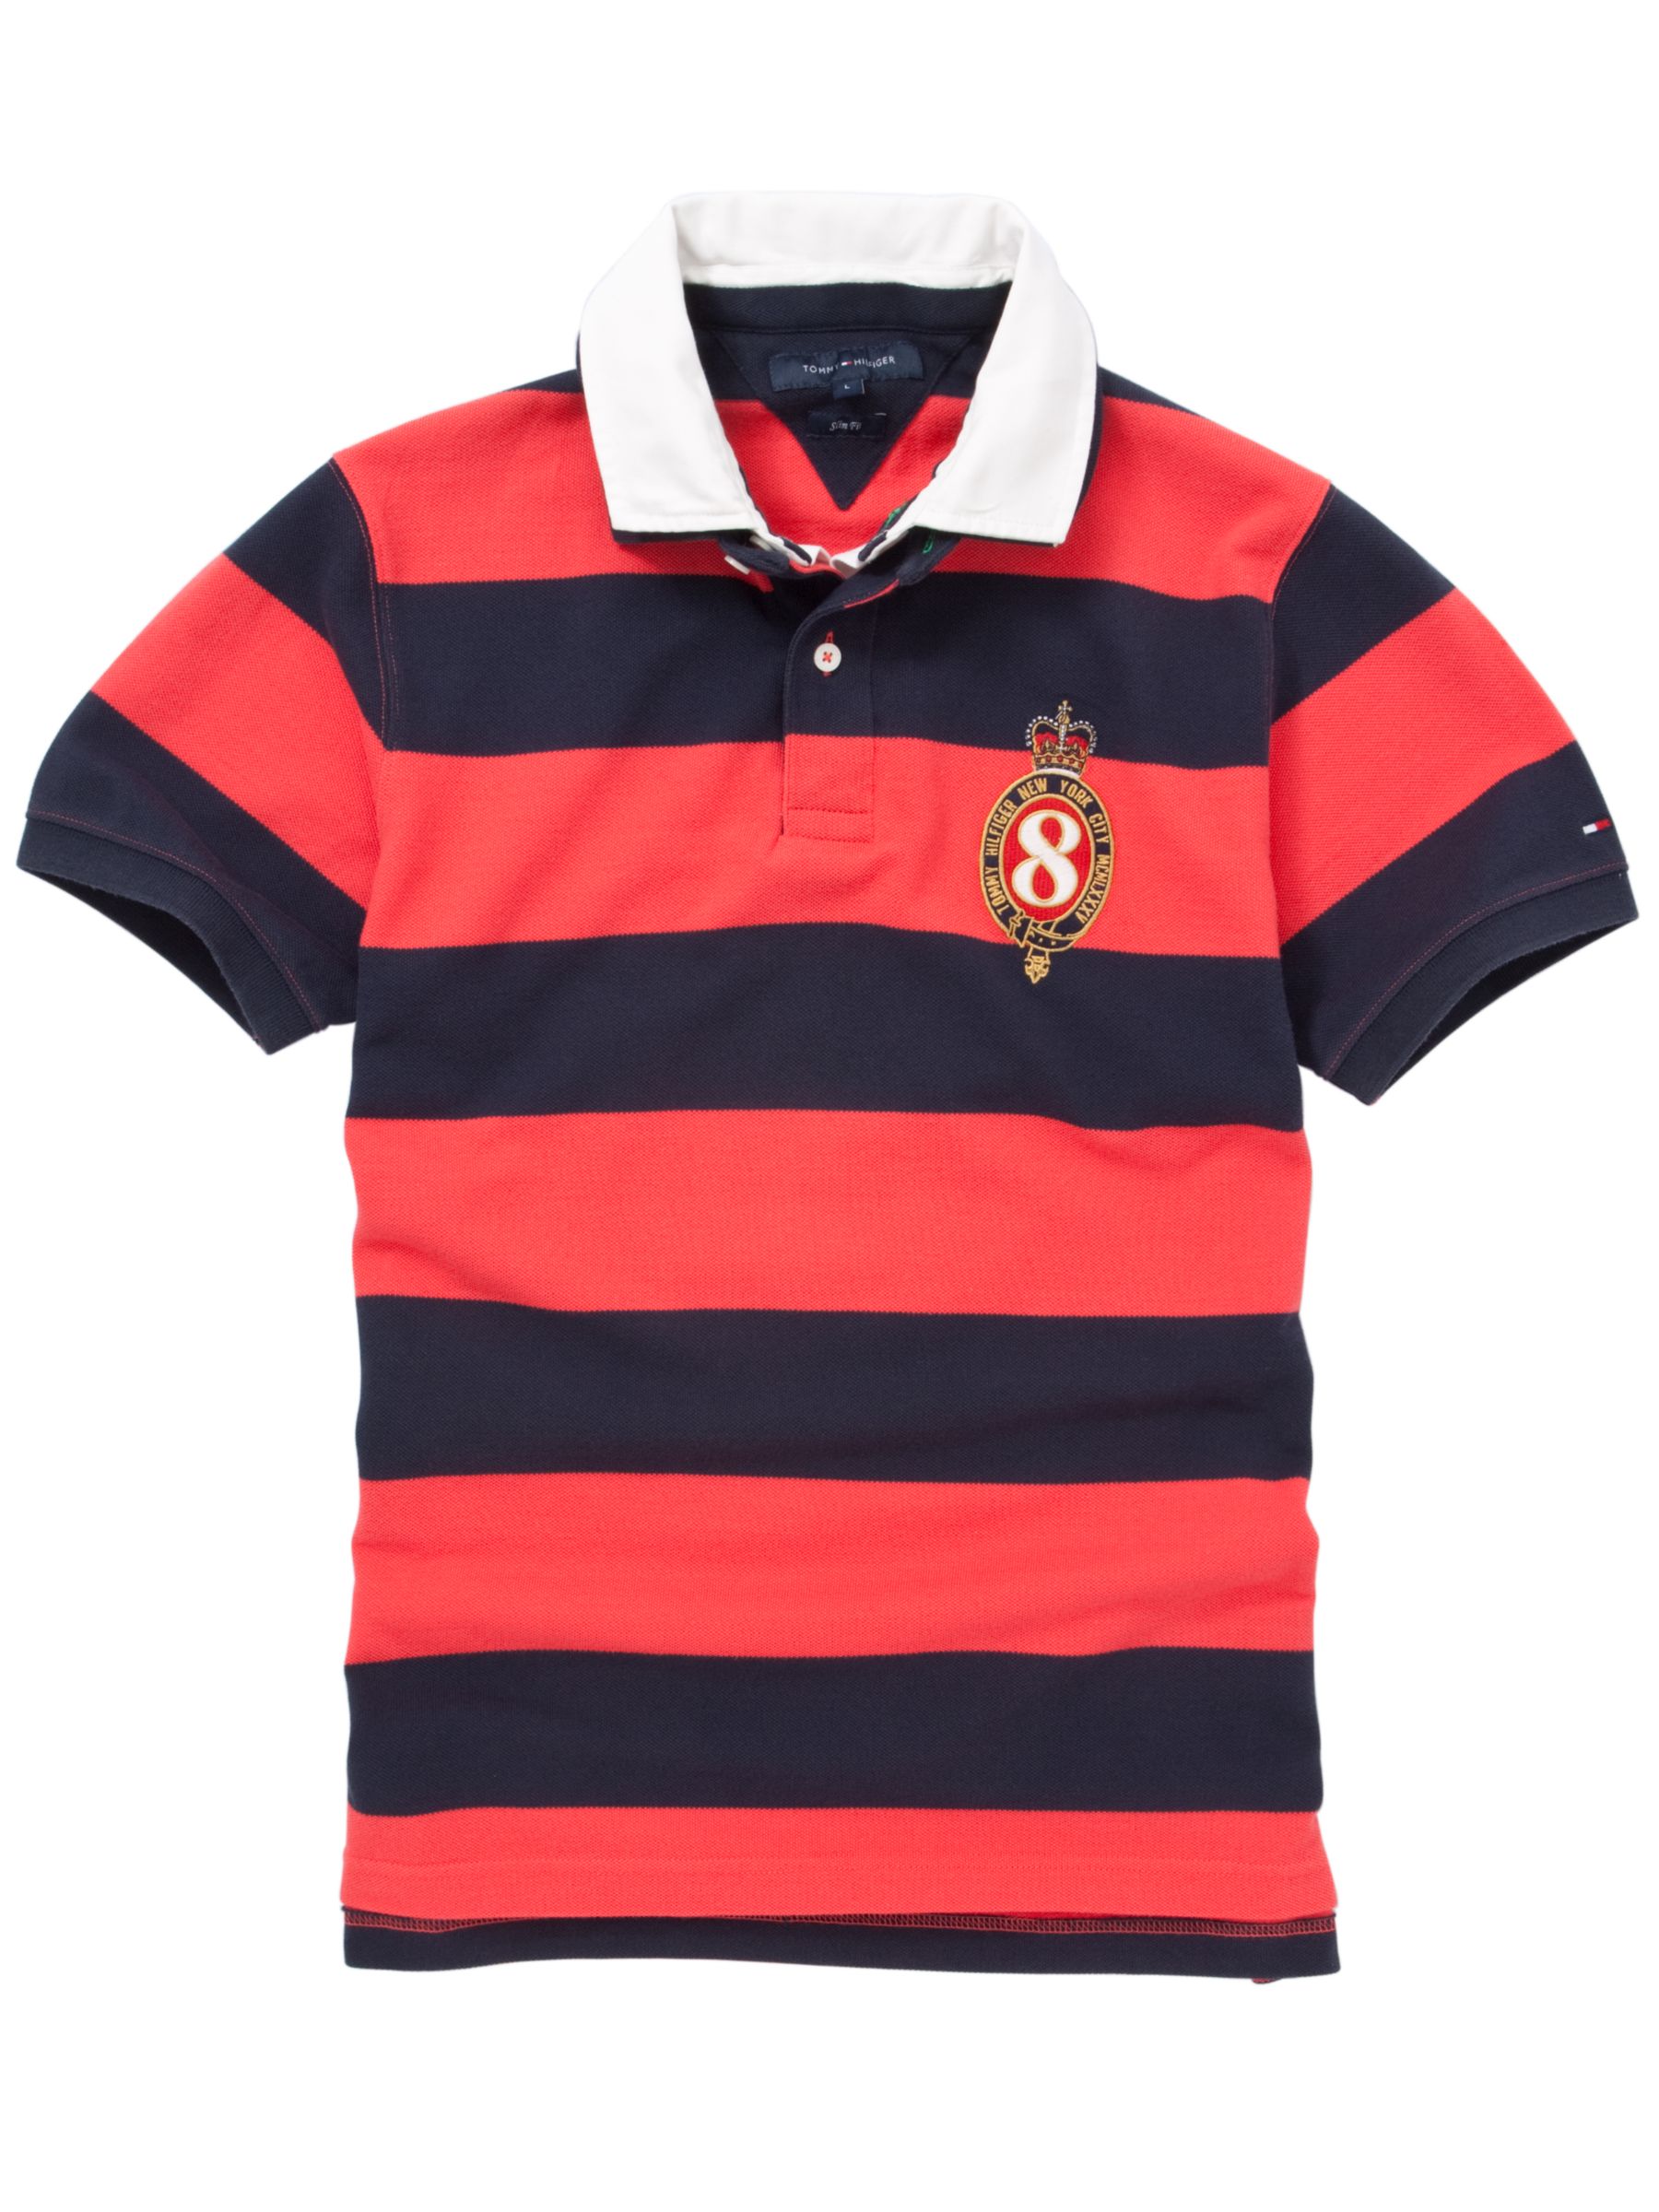 Tommy Hilfiger Walter Stripe Rugby Shirt, Coral